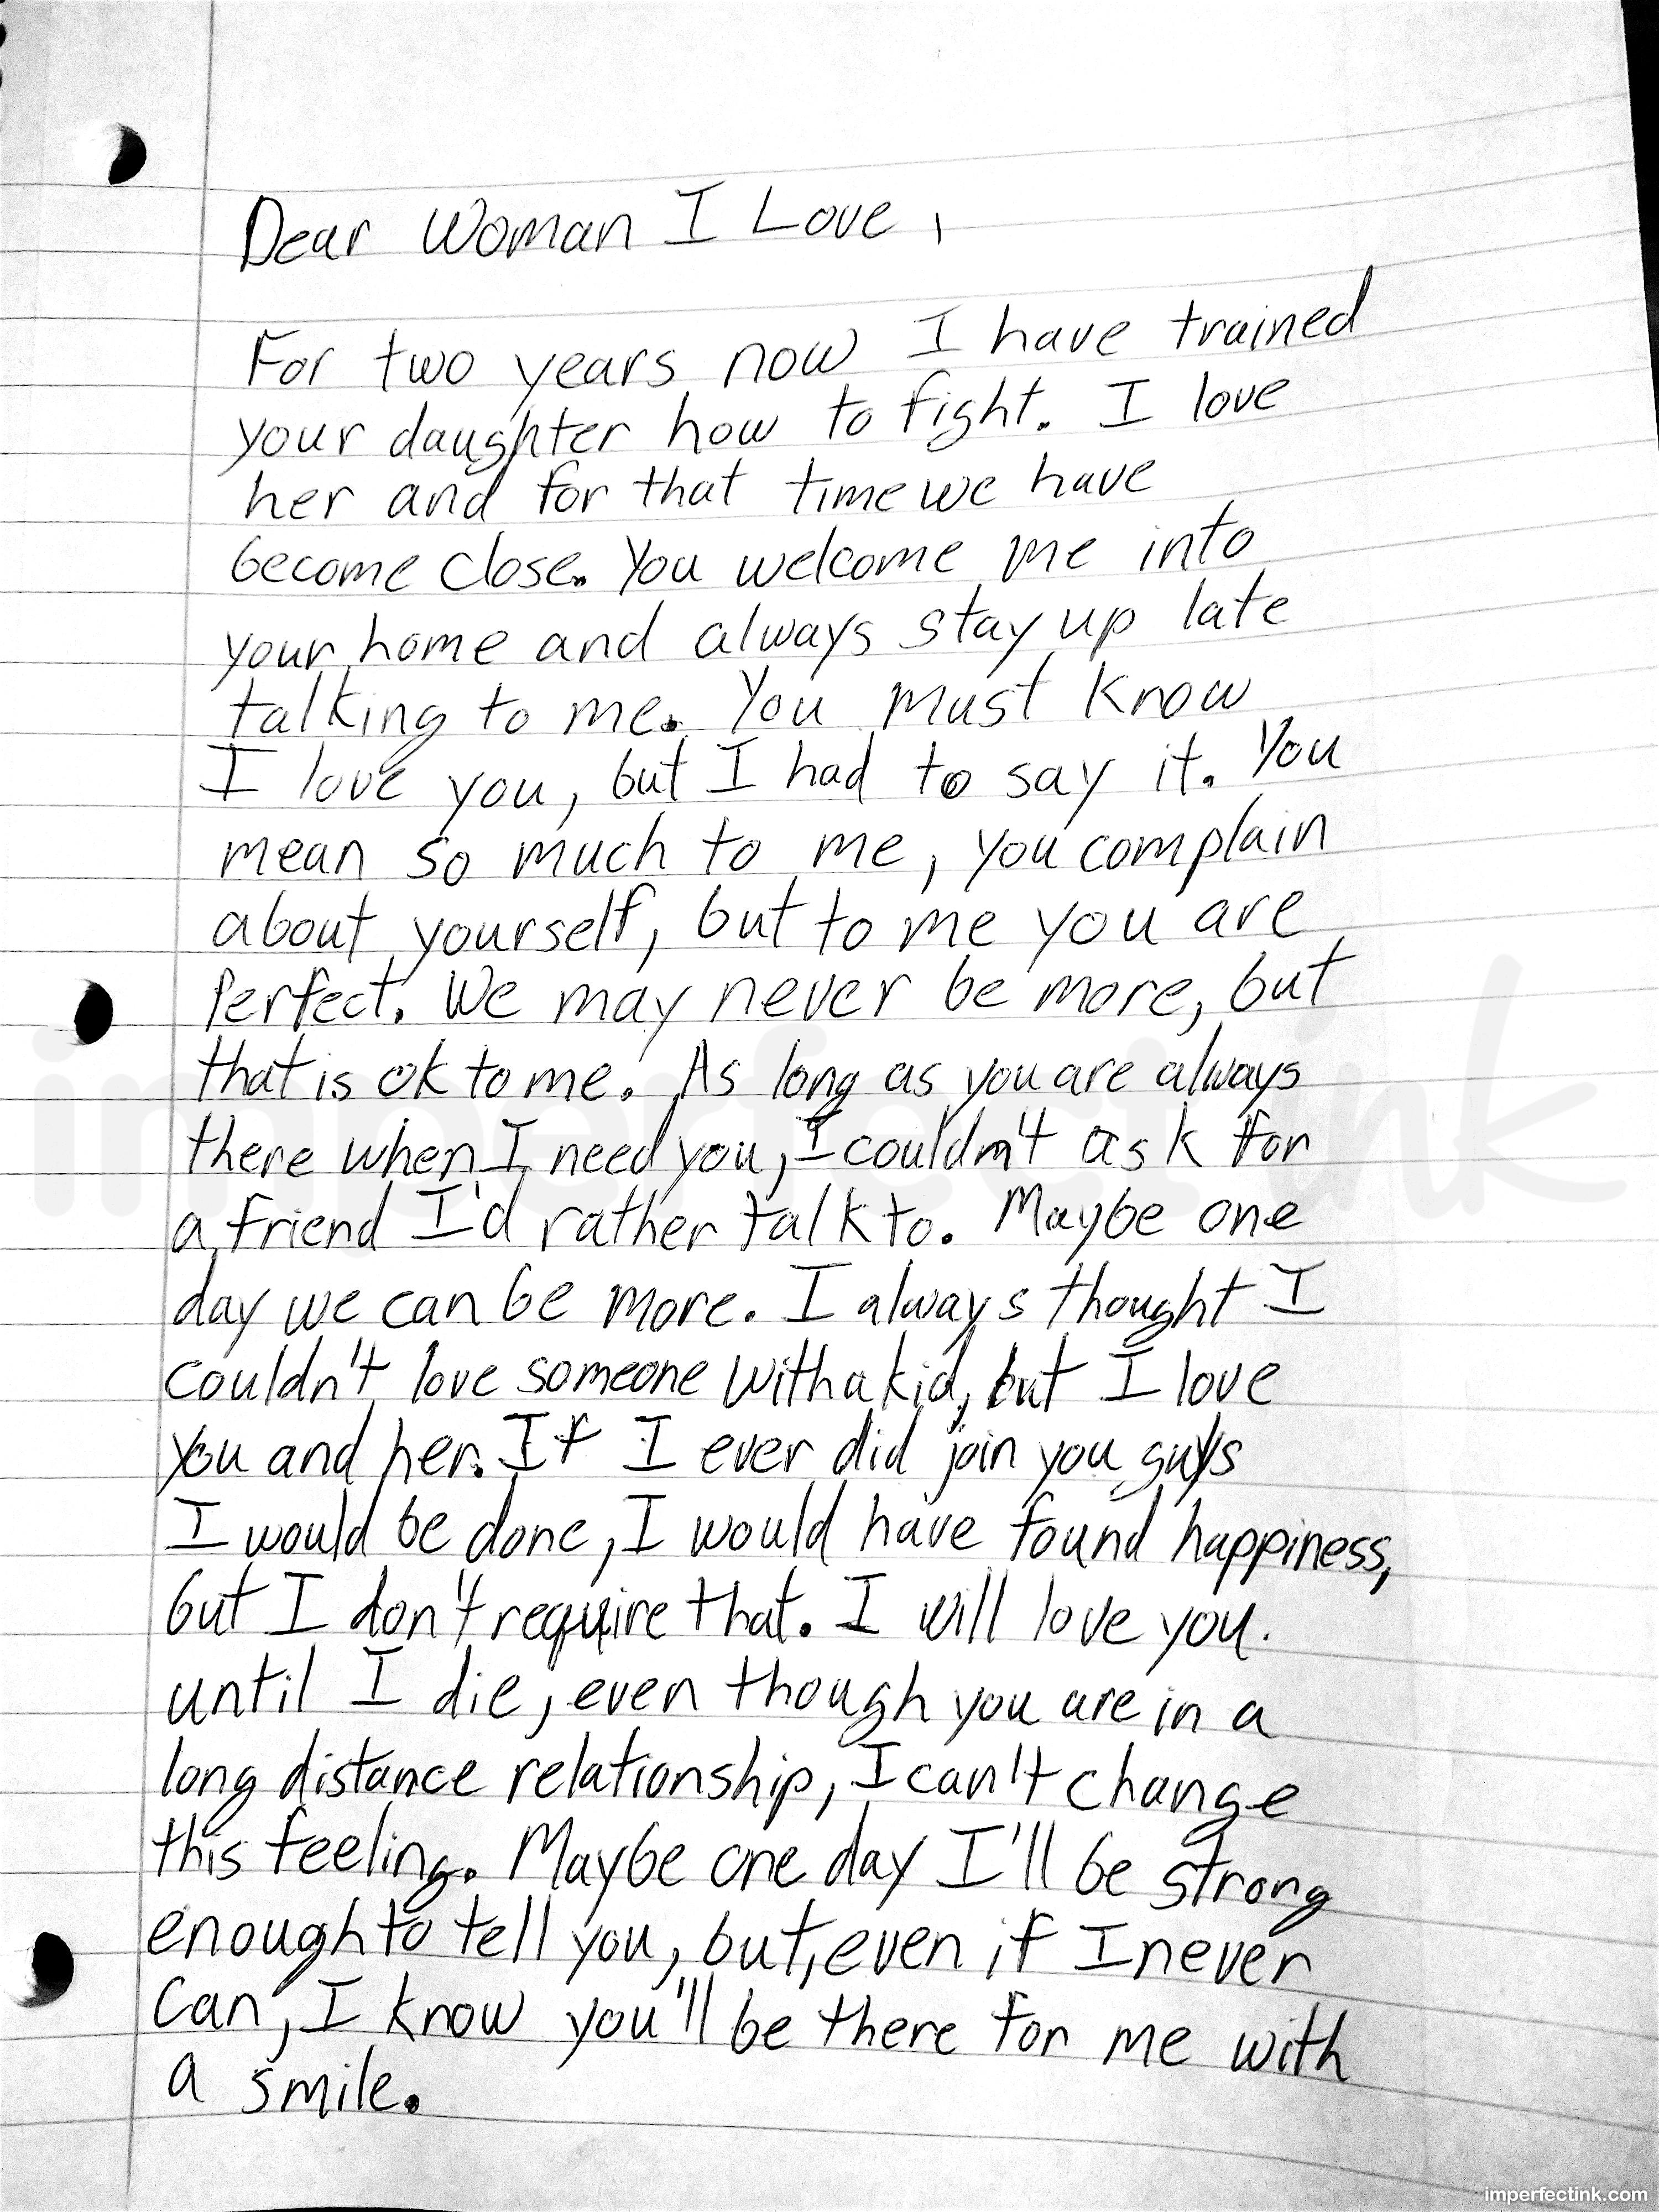 Read Handwritten Love Letters Letters Shared Anonymously